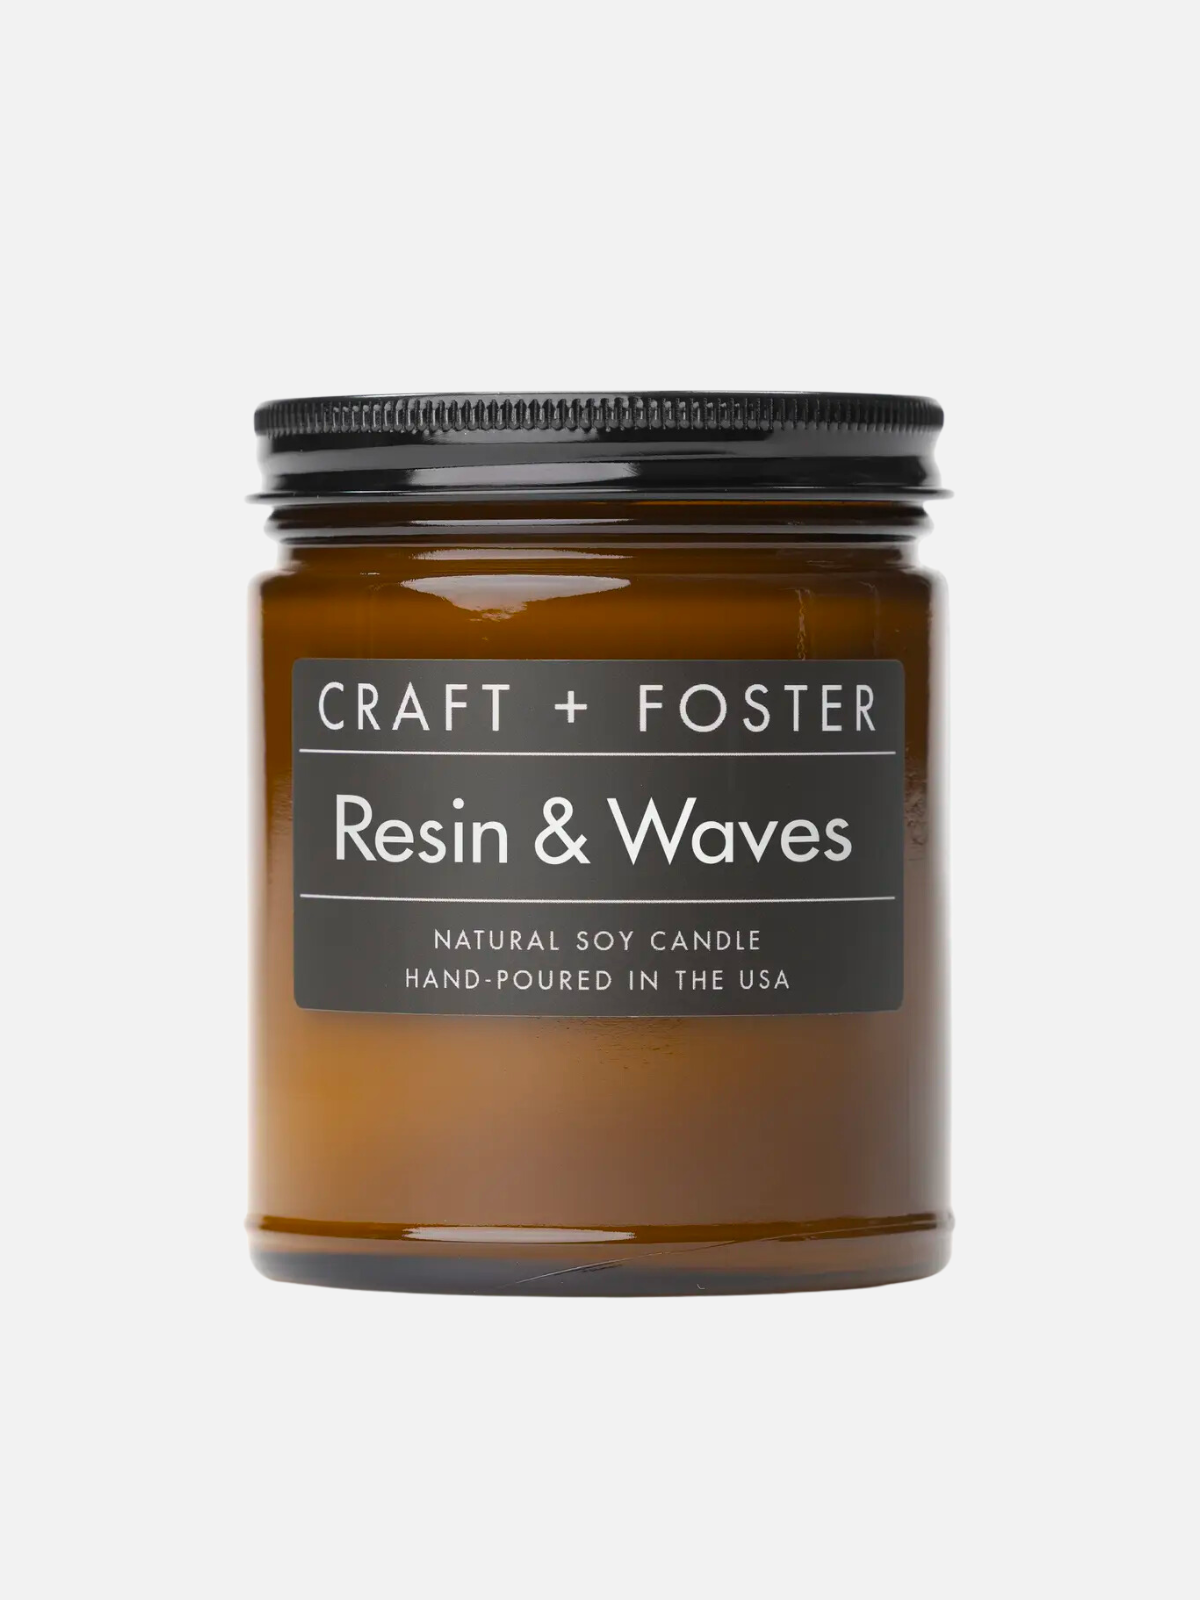 Craft + Foster Candles 8oz Kempt Athens Georgia Mens Gift Guide Holiday Shop Resin & Waves